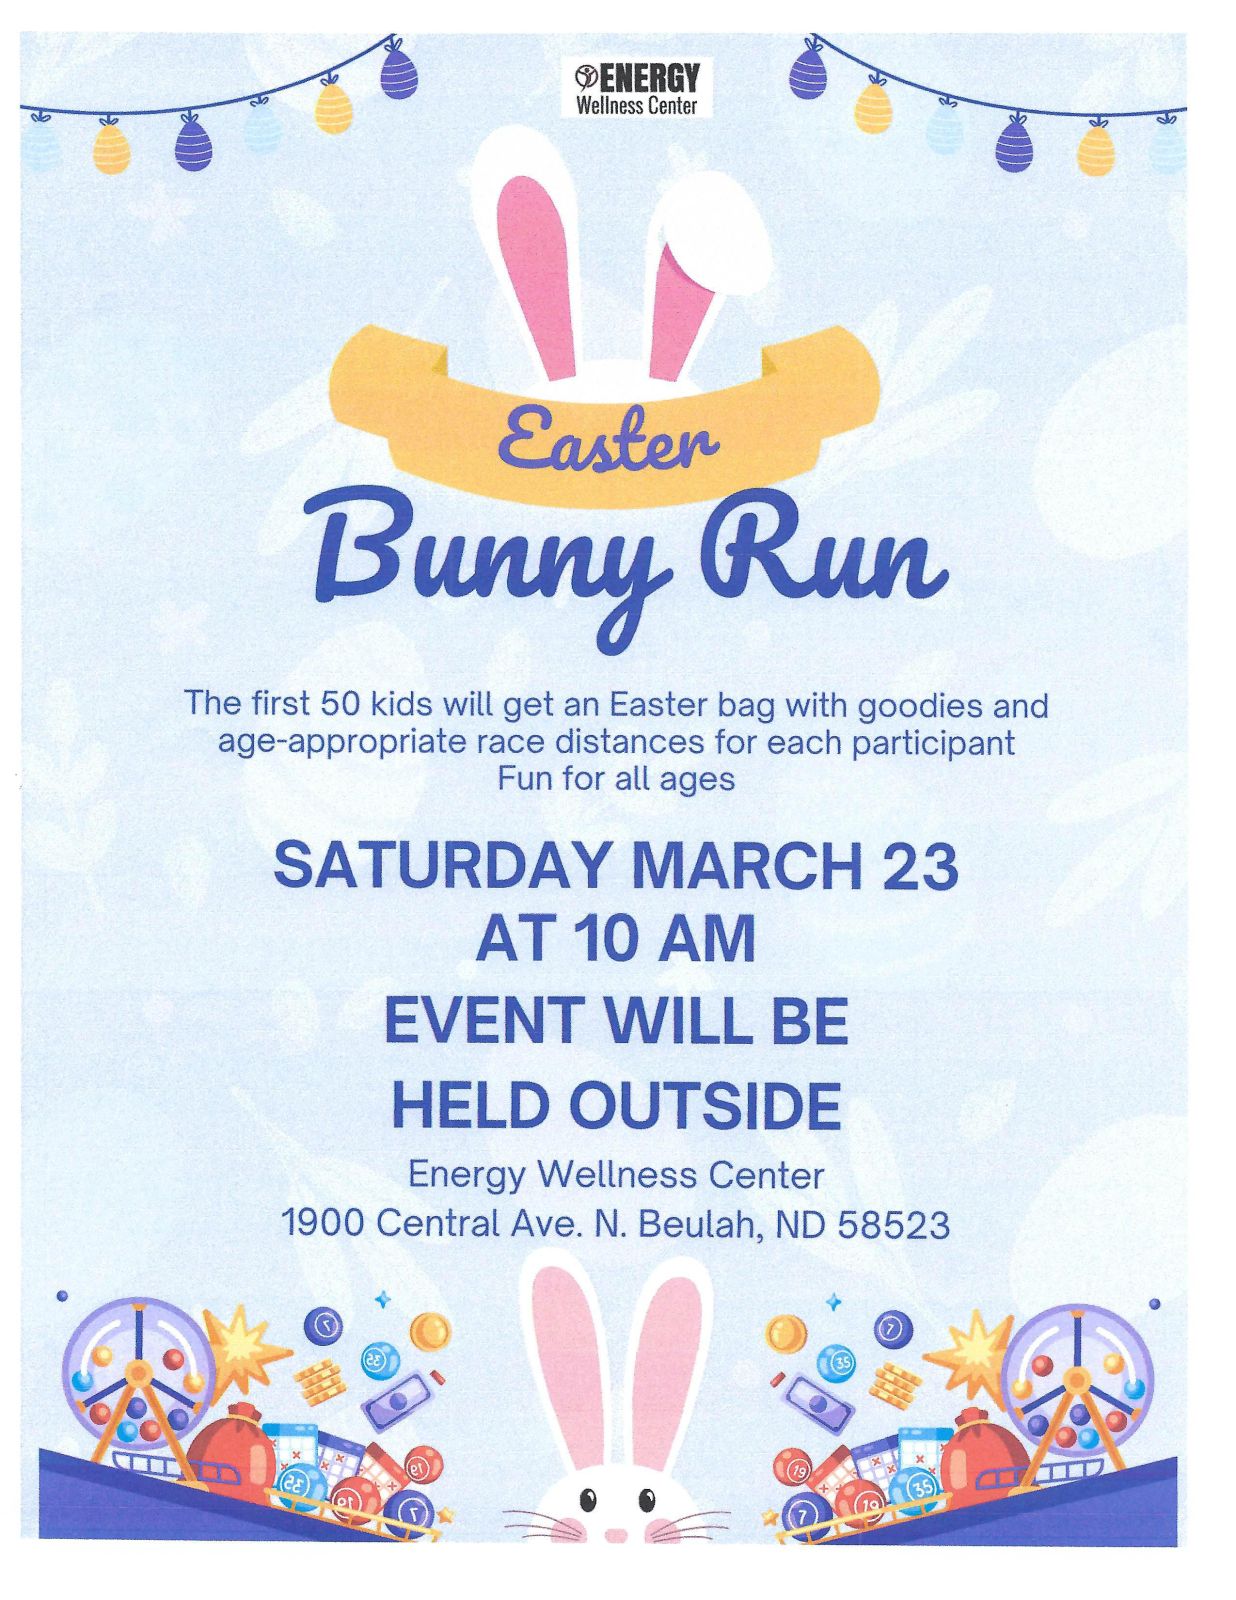 Event Promo Photo For Easter Bunny Run